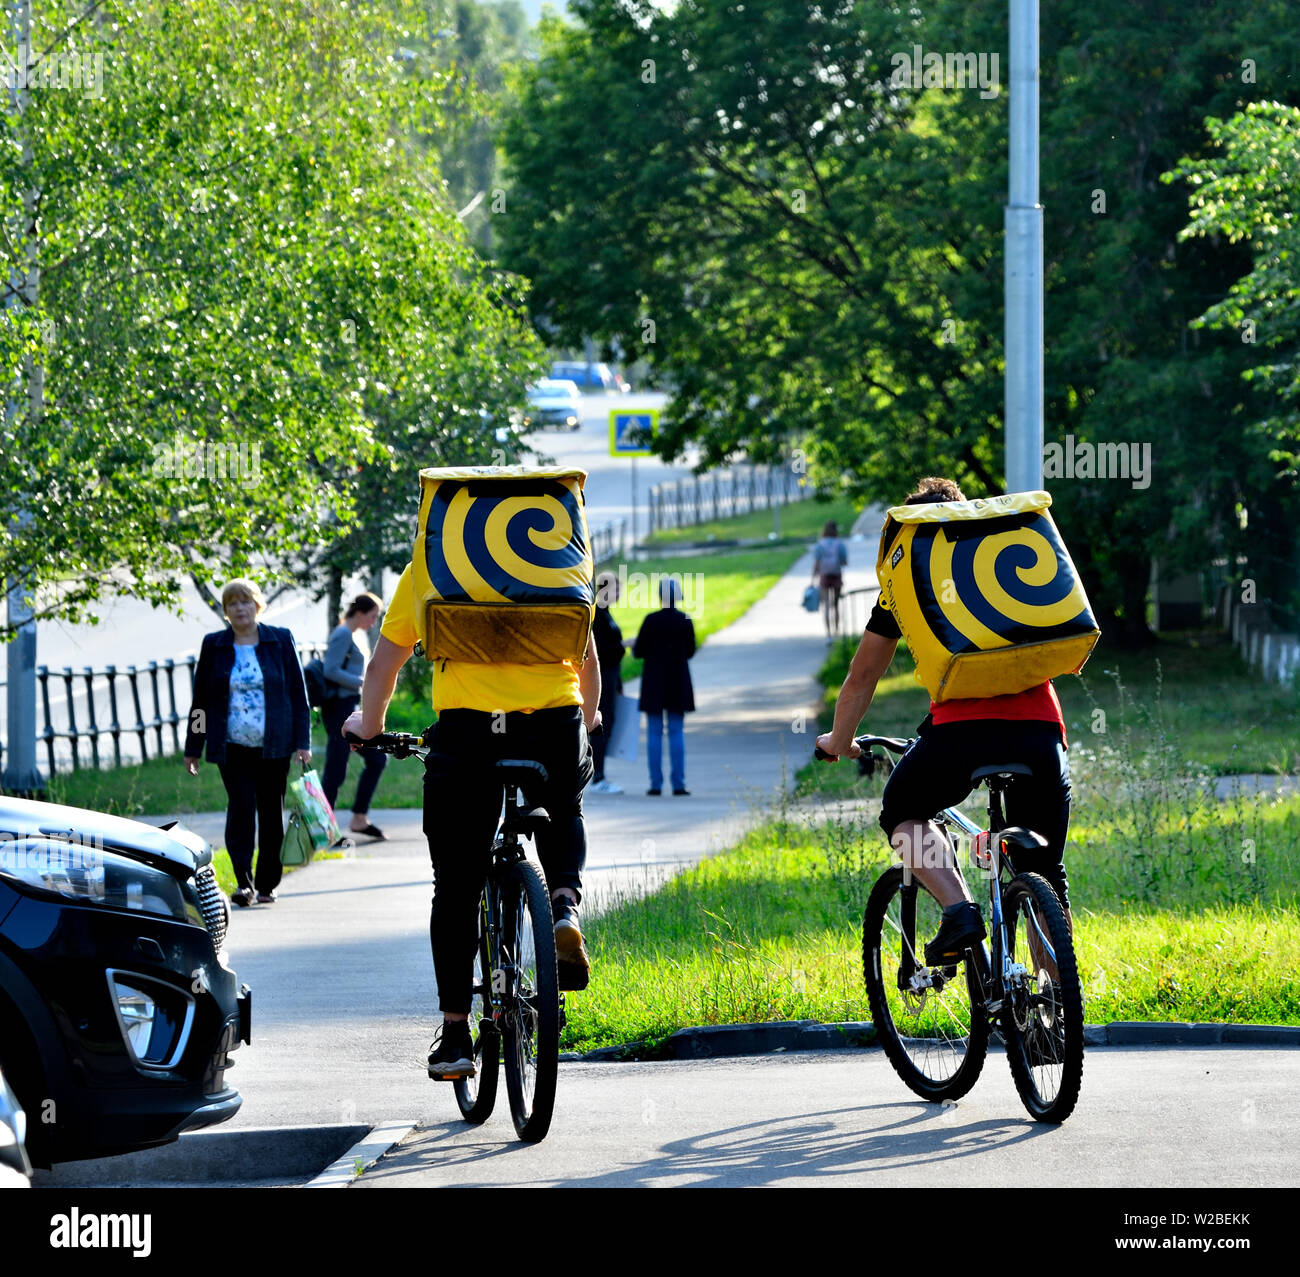 Couriers on bicycles. Stock Photo